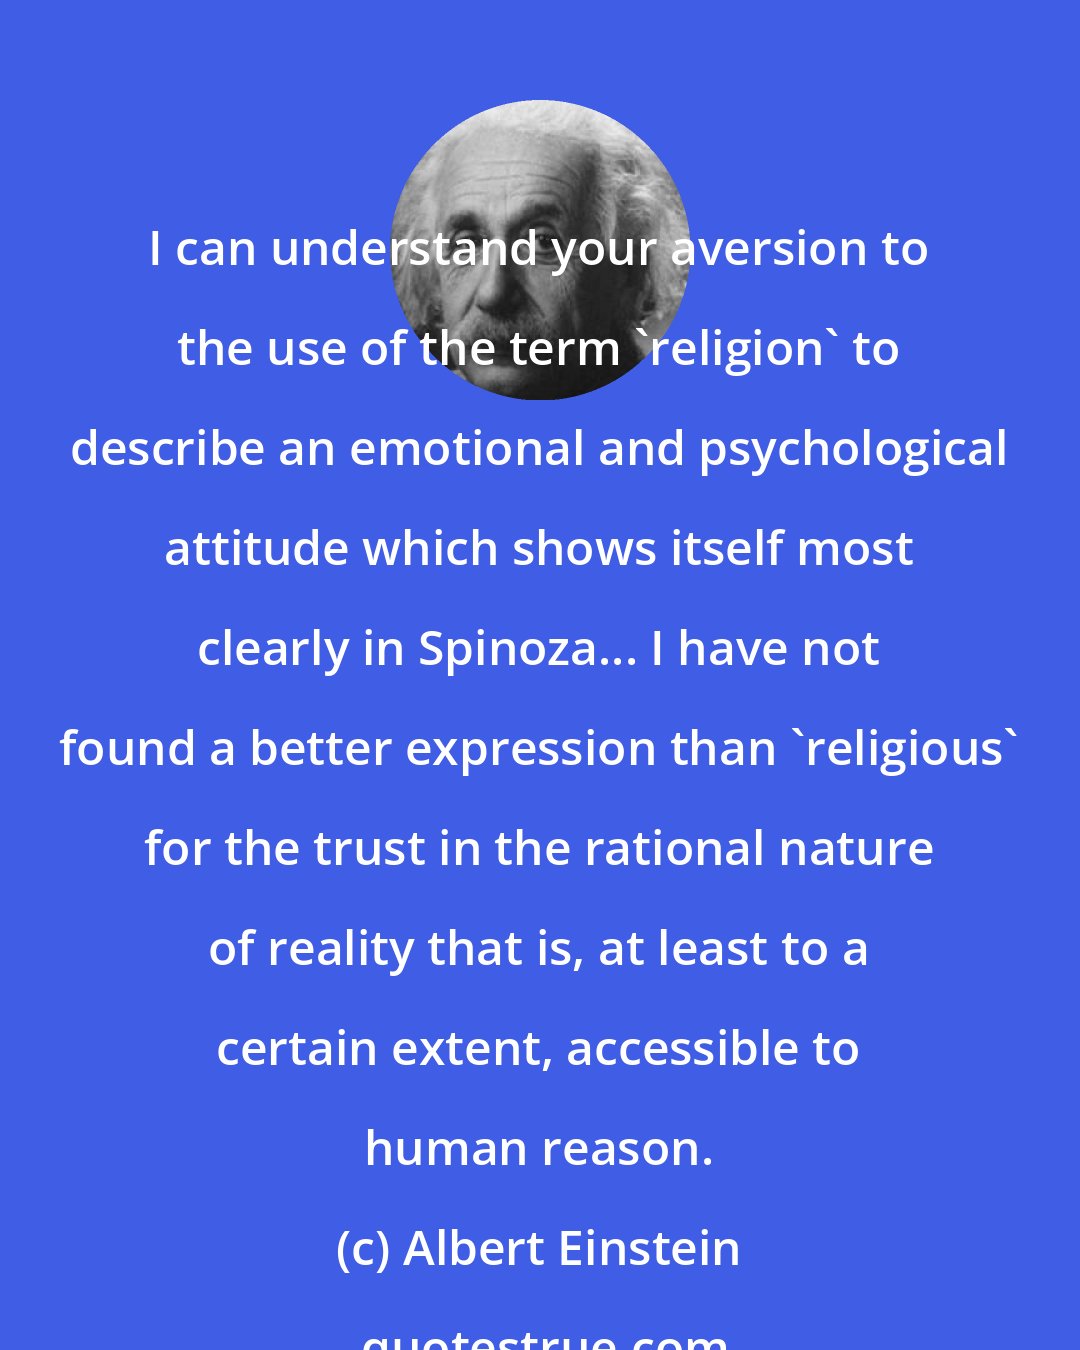 Albert Einstein: I can understand your aversion to the use of the term 'religion' to describe an emotional and psychological attitude which shows itself most clearly in Spinoza... I have not found a better expression than 'religious' for the trust in the rational nature of reality that is, at least to a certain extent, accessible to human reason.